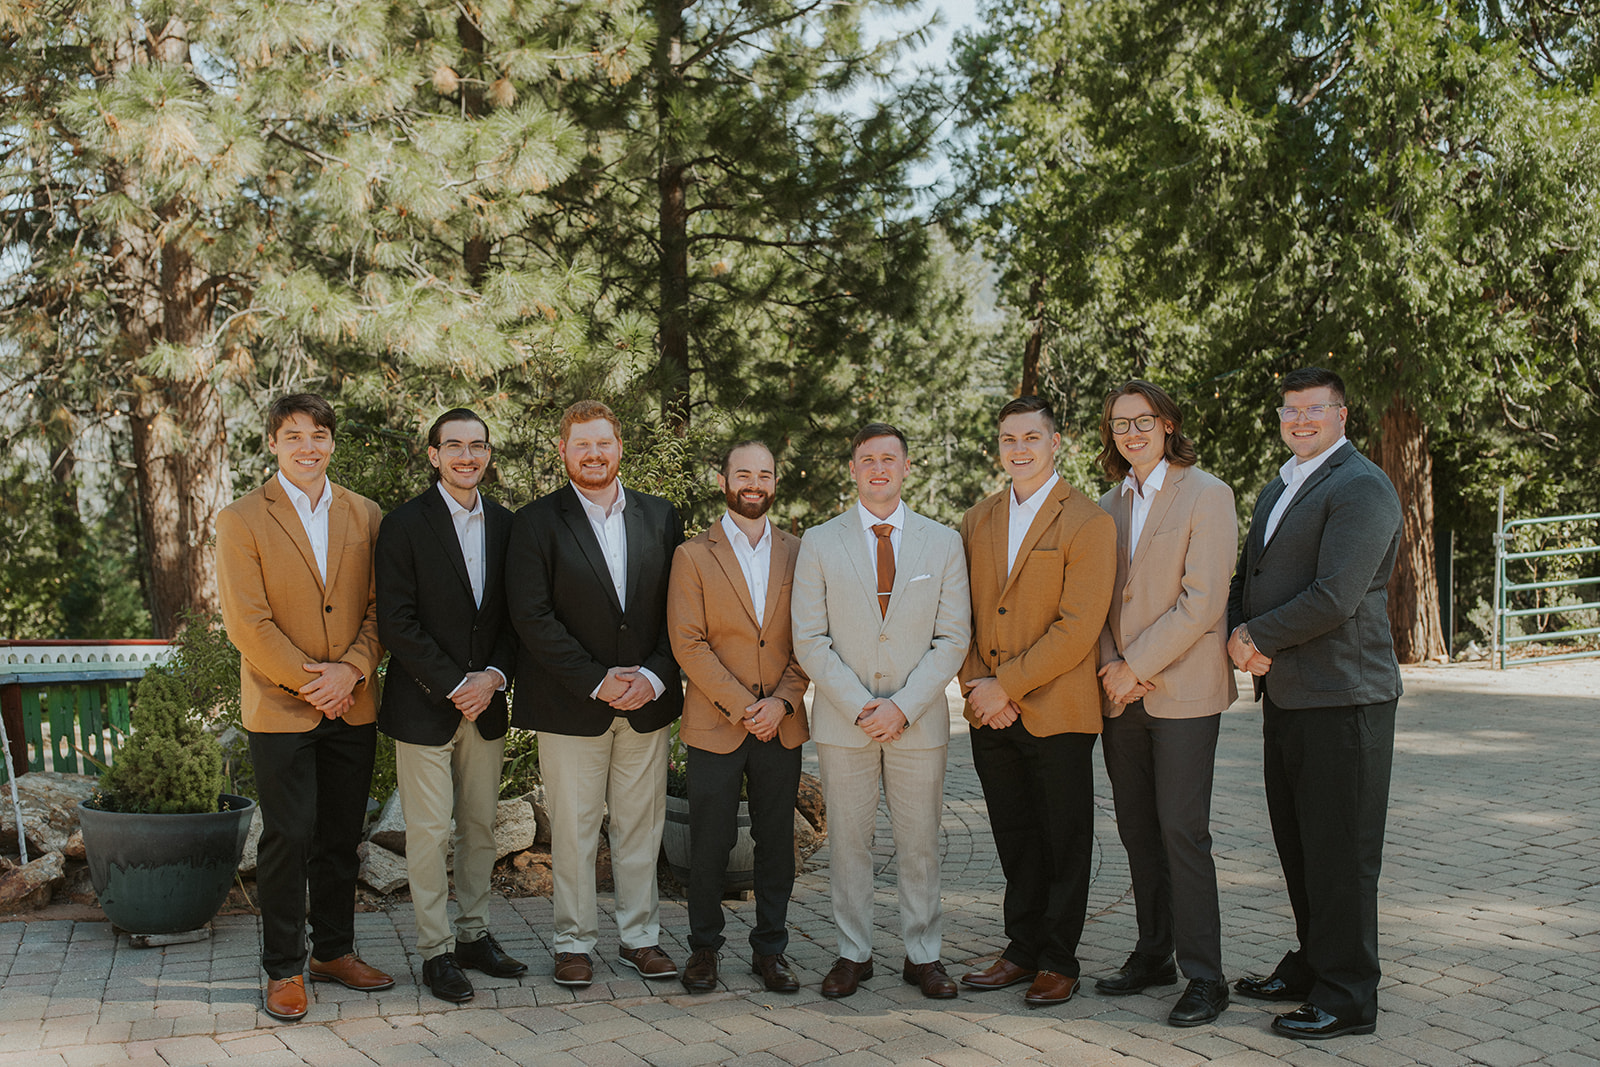 groom and groomsmen photos from a California mountain wedding at lillaskog lodge